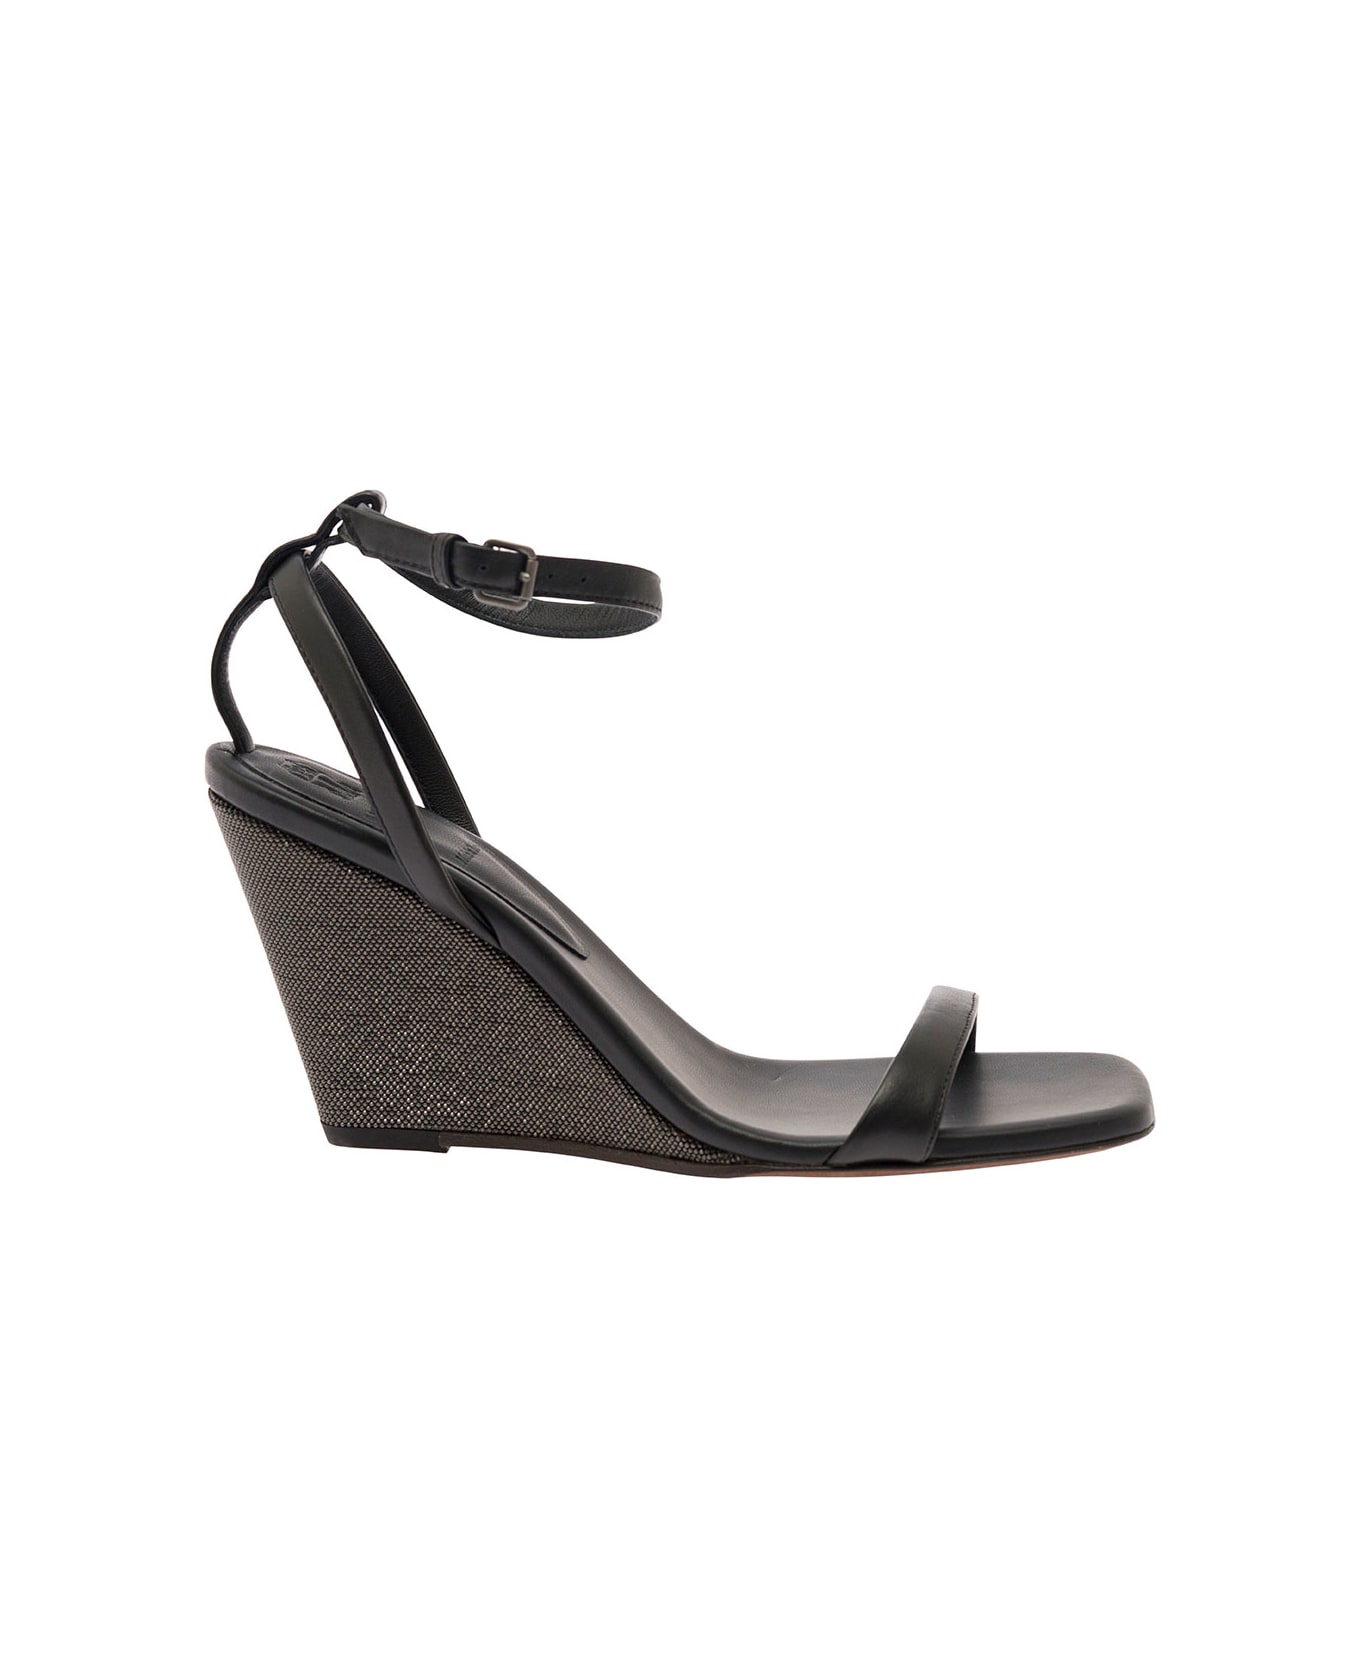 Brunello Cucinelli Black Wedge Sandals With Monile Detail In Leather Woman - Black サンダル